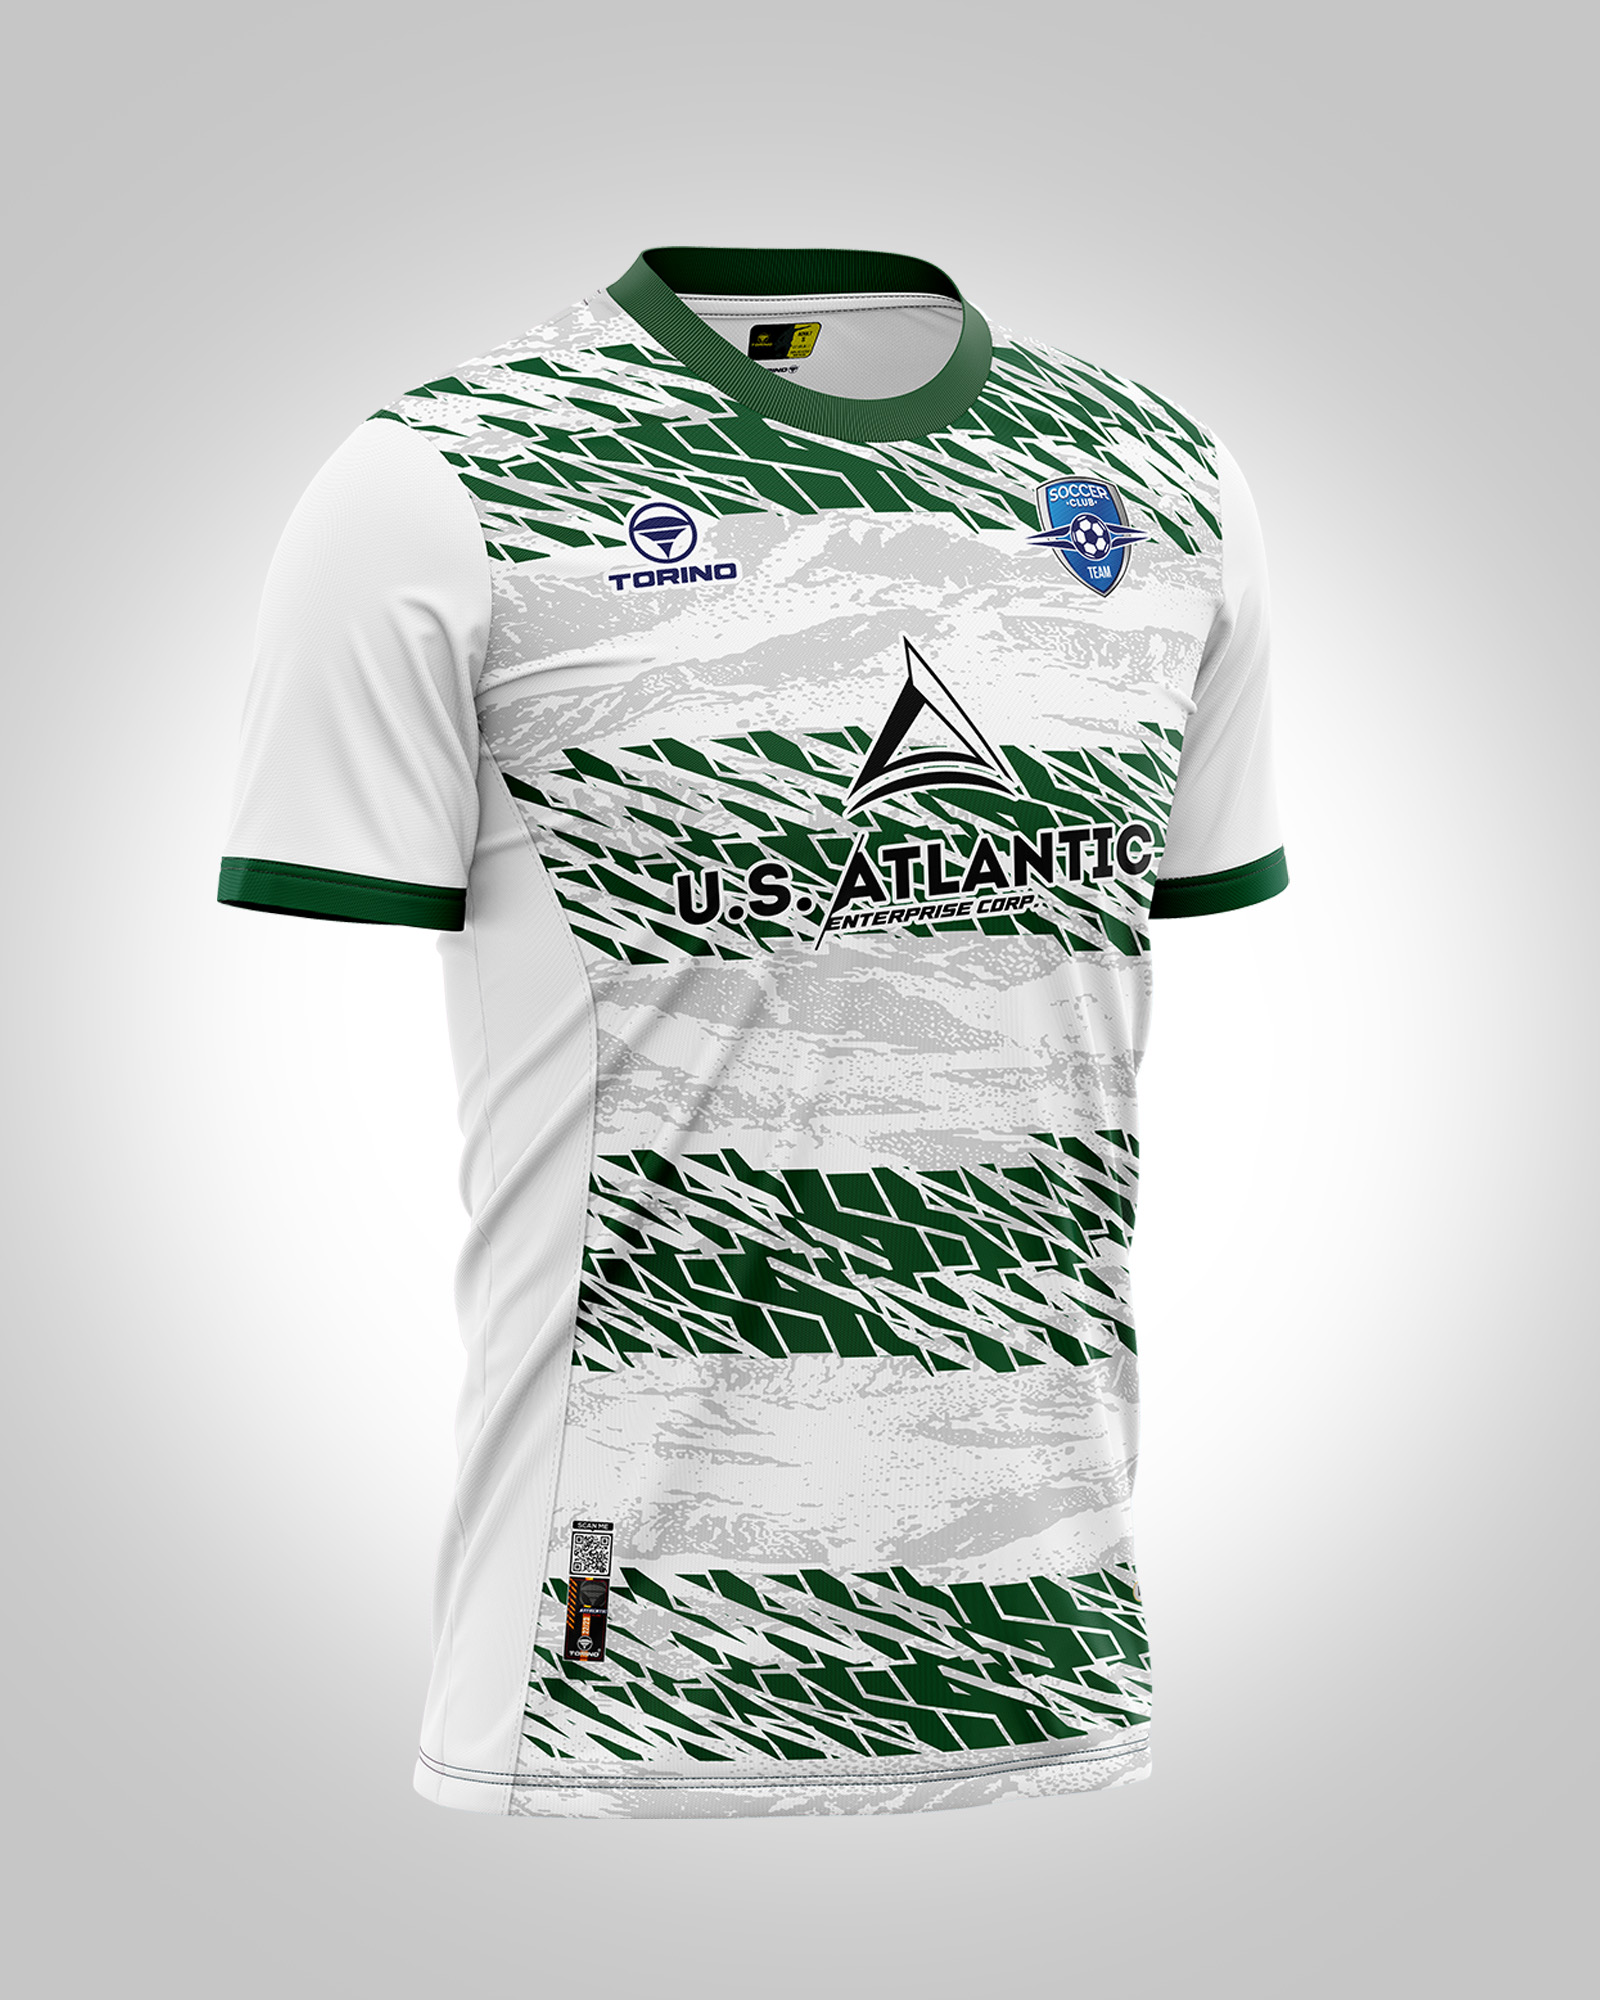 jersey_competition11a